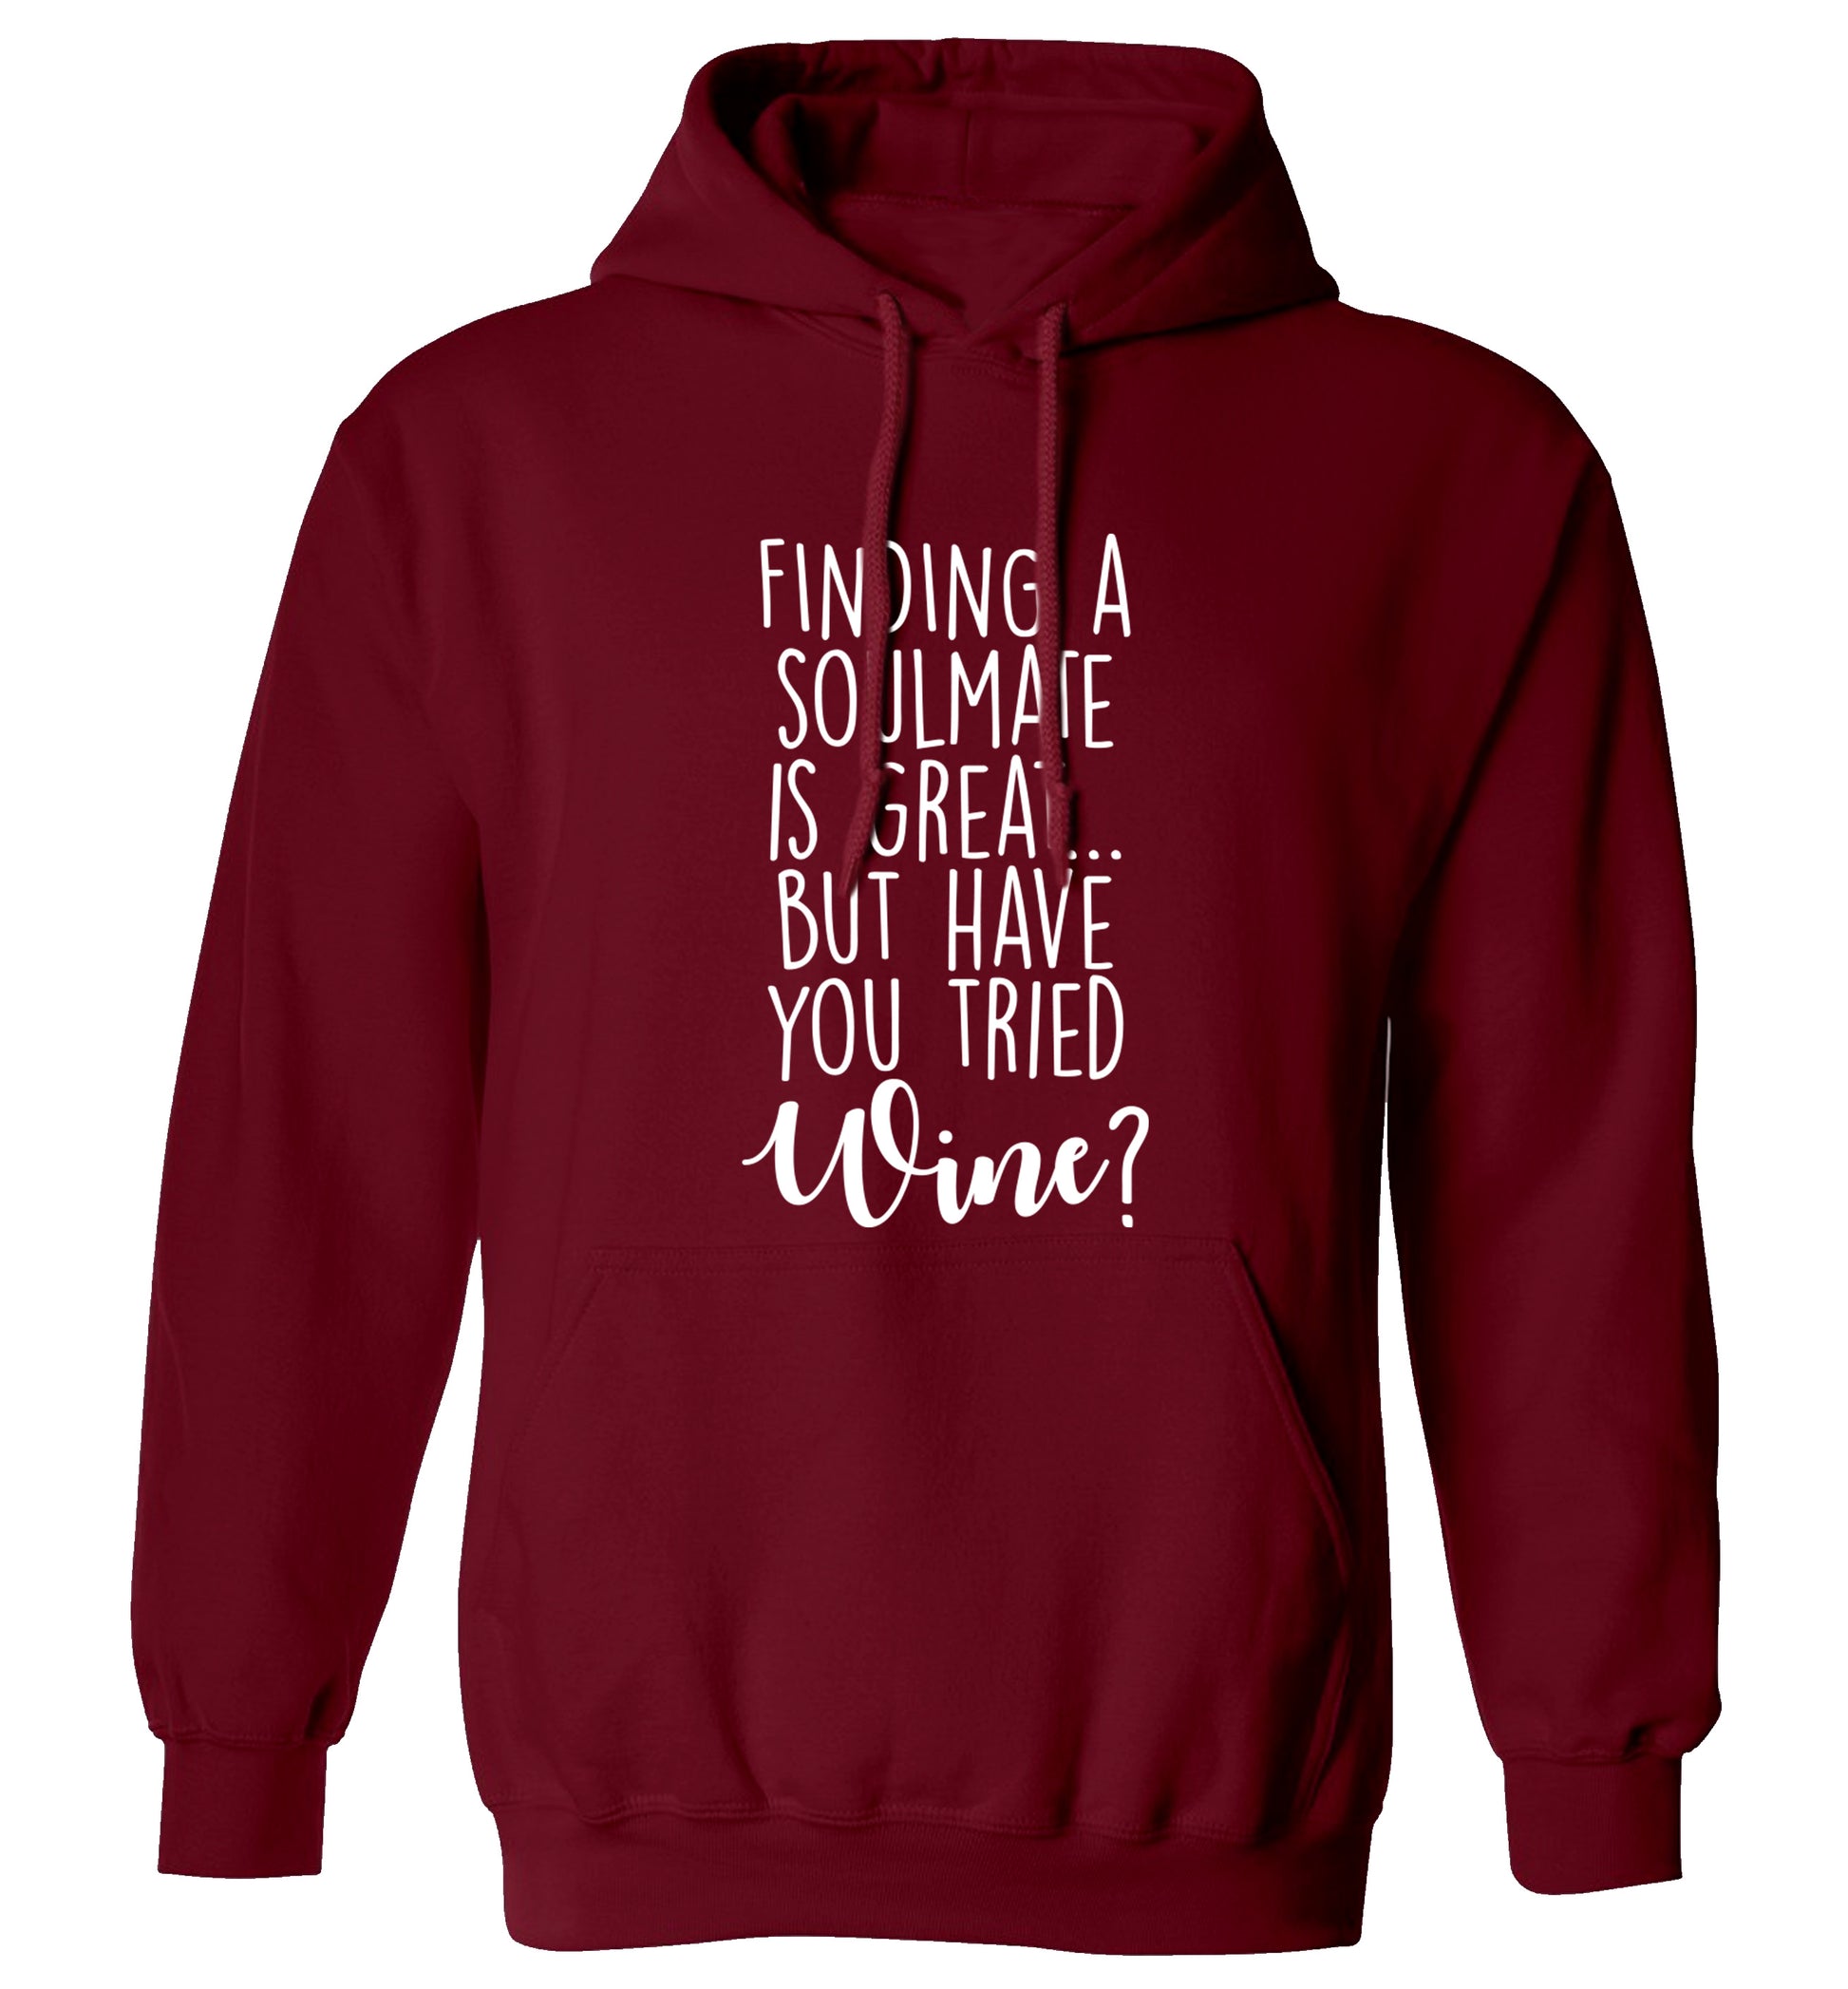 Finding a soulmate is great but have you tried wine? adults unisex maroon hoodie 2XL